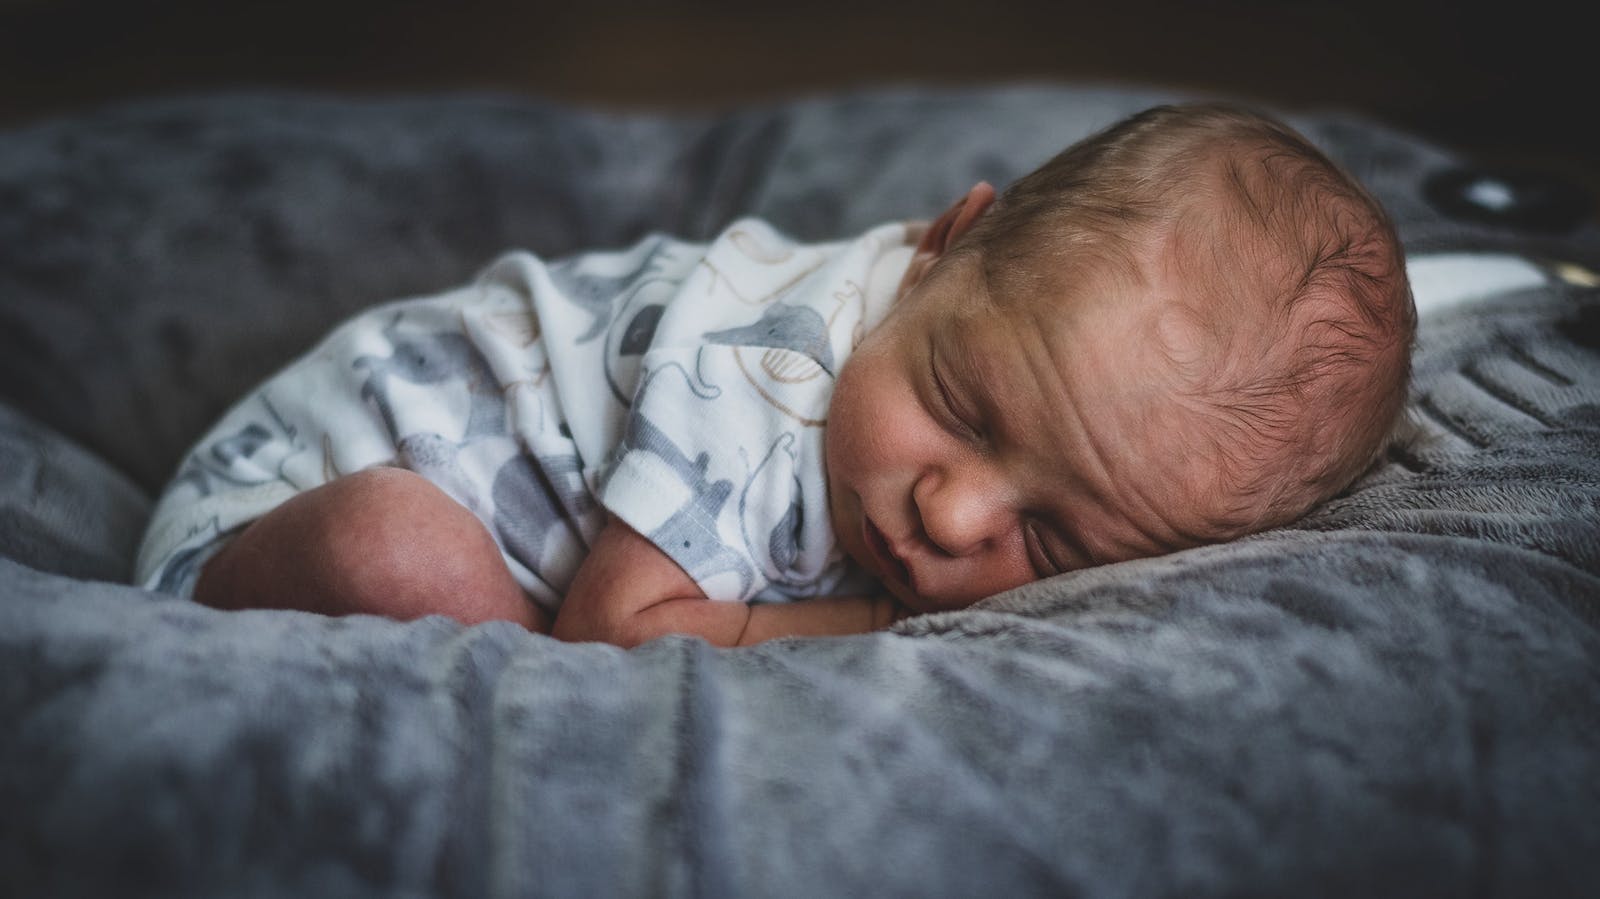 Asher at one month. Photo by Toby Hagan